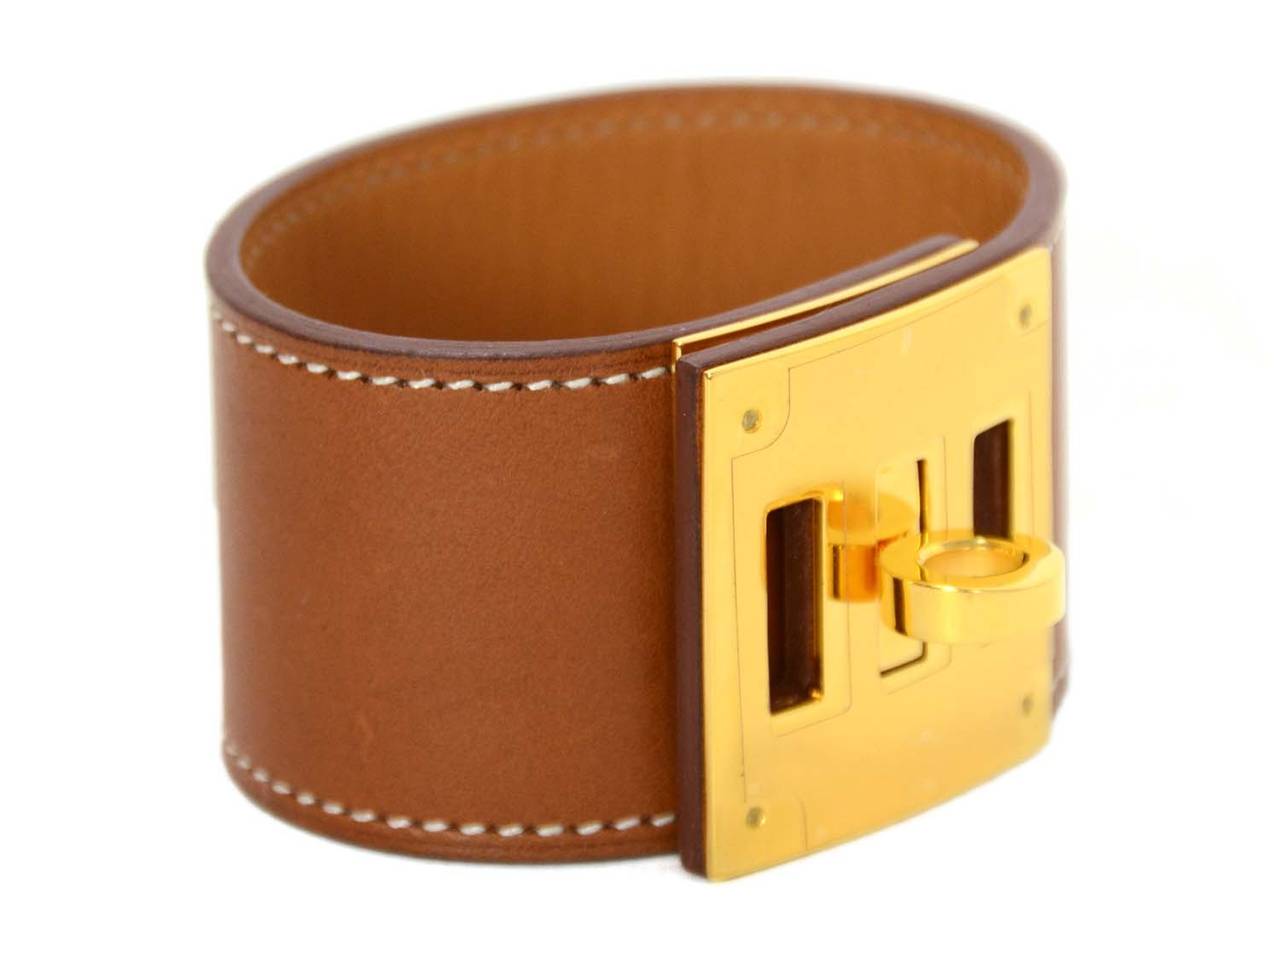 Hermes '13 Fauve Barenia Leather Kelly Dog Bracelet
Features three notch closure for adjustable size

    Made in: France
    Year of Production: 2013
    Stamp: N stamp, Q stamp in square
    Closure: Turn lock closure
    Color: Fauve brown